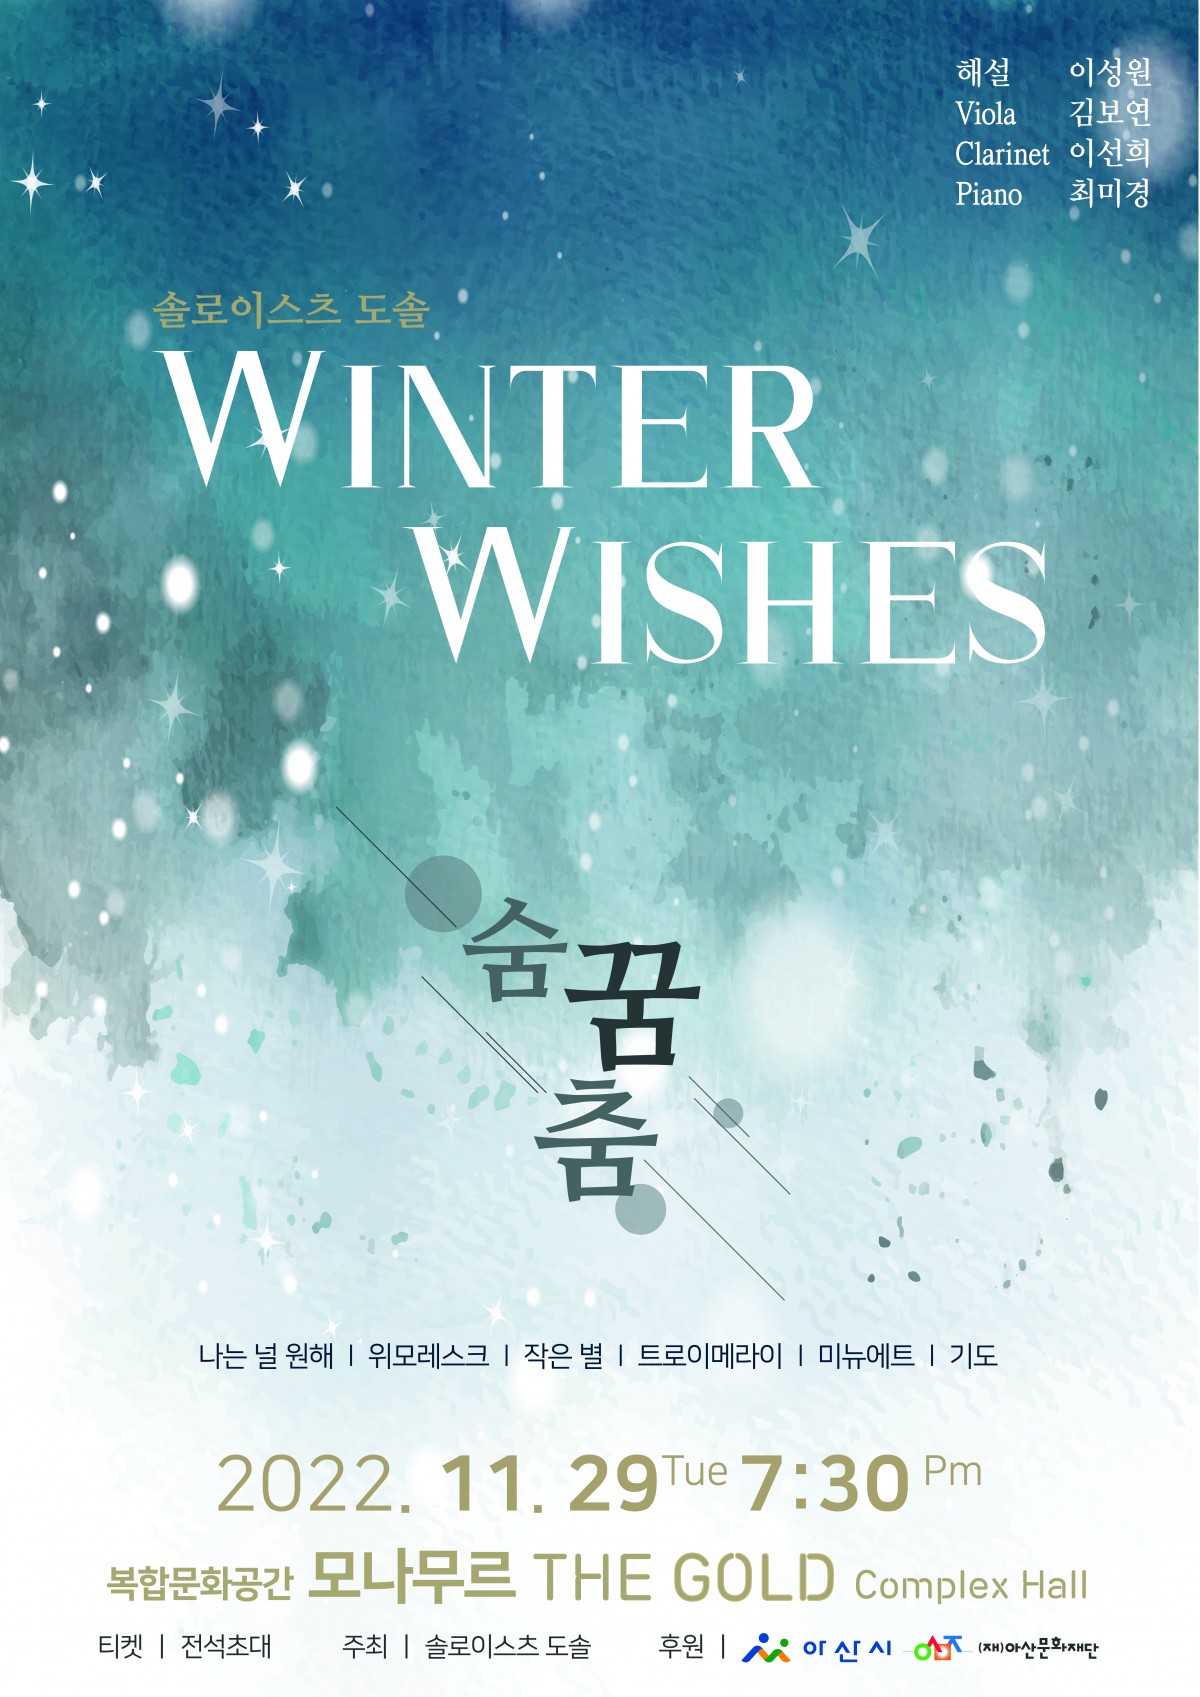 WINTER WISHES